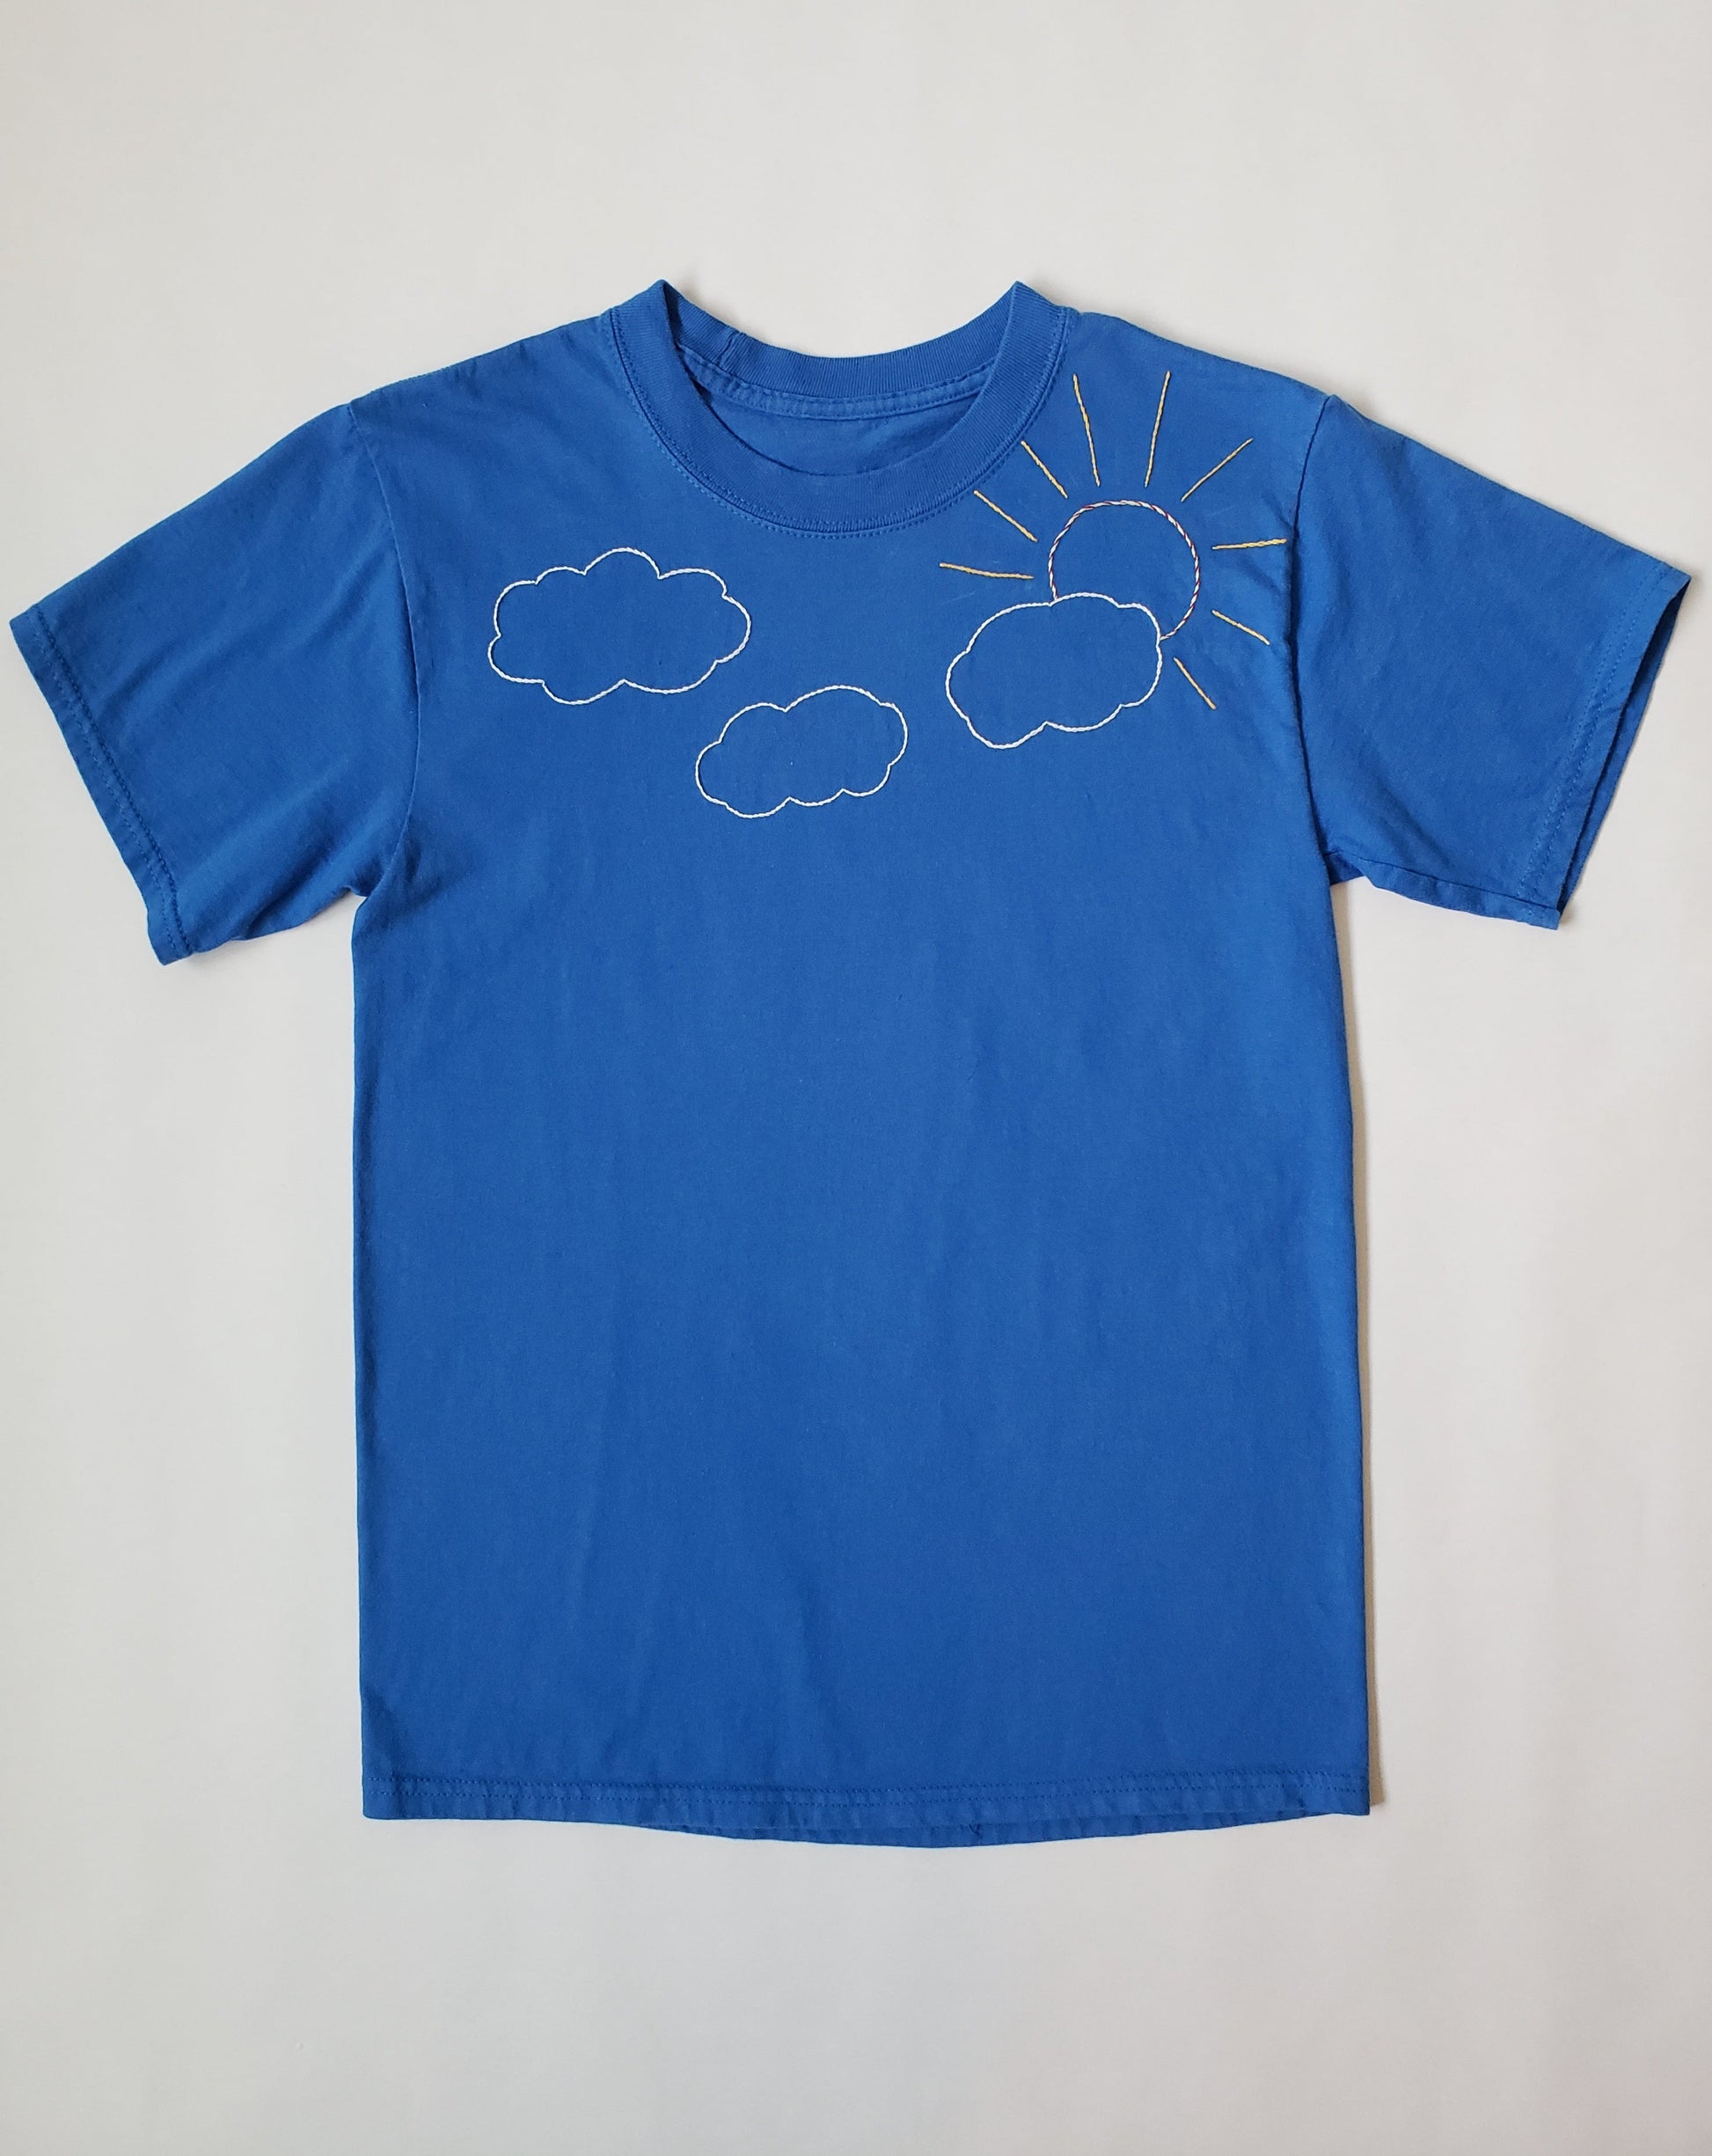 A blue crewneck tee laid flat.  There are three white clouds and a sun stitched in yellow, red, and orange in a twisted effect, with yellow rays. The sun pokes out from behind the rightmost cloud.